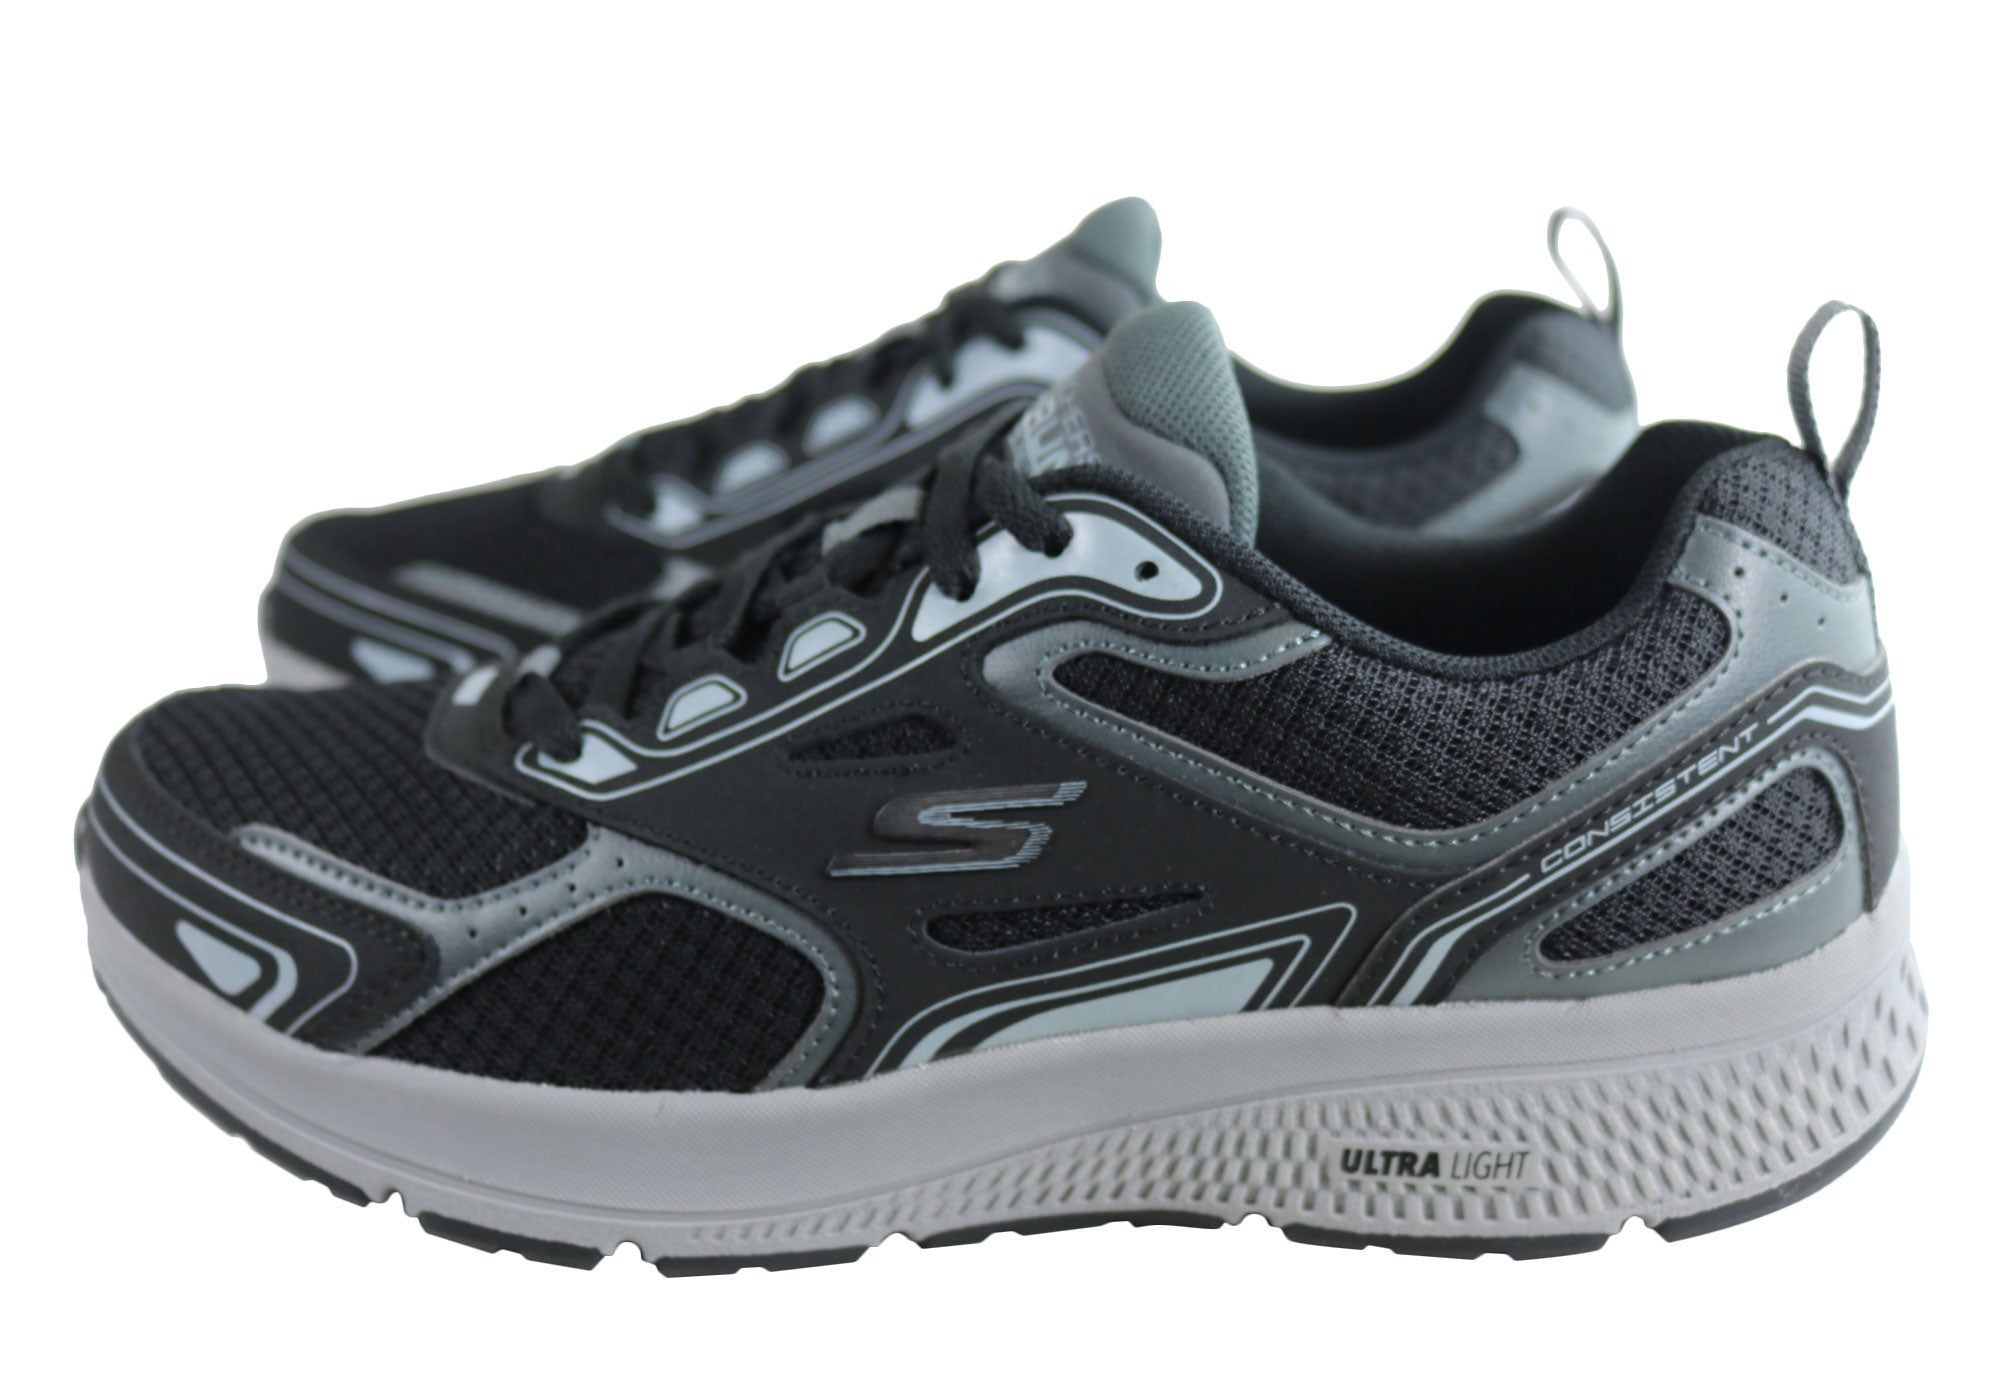 Skechers Mens Go Run Consistent Comfortable Athletic Shoes